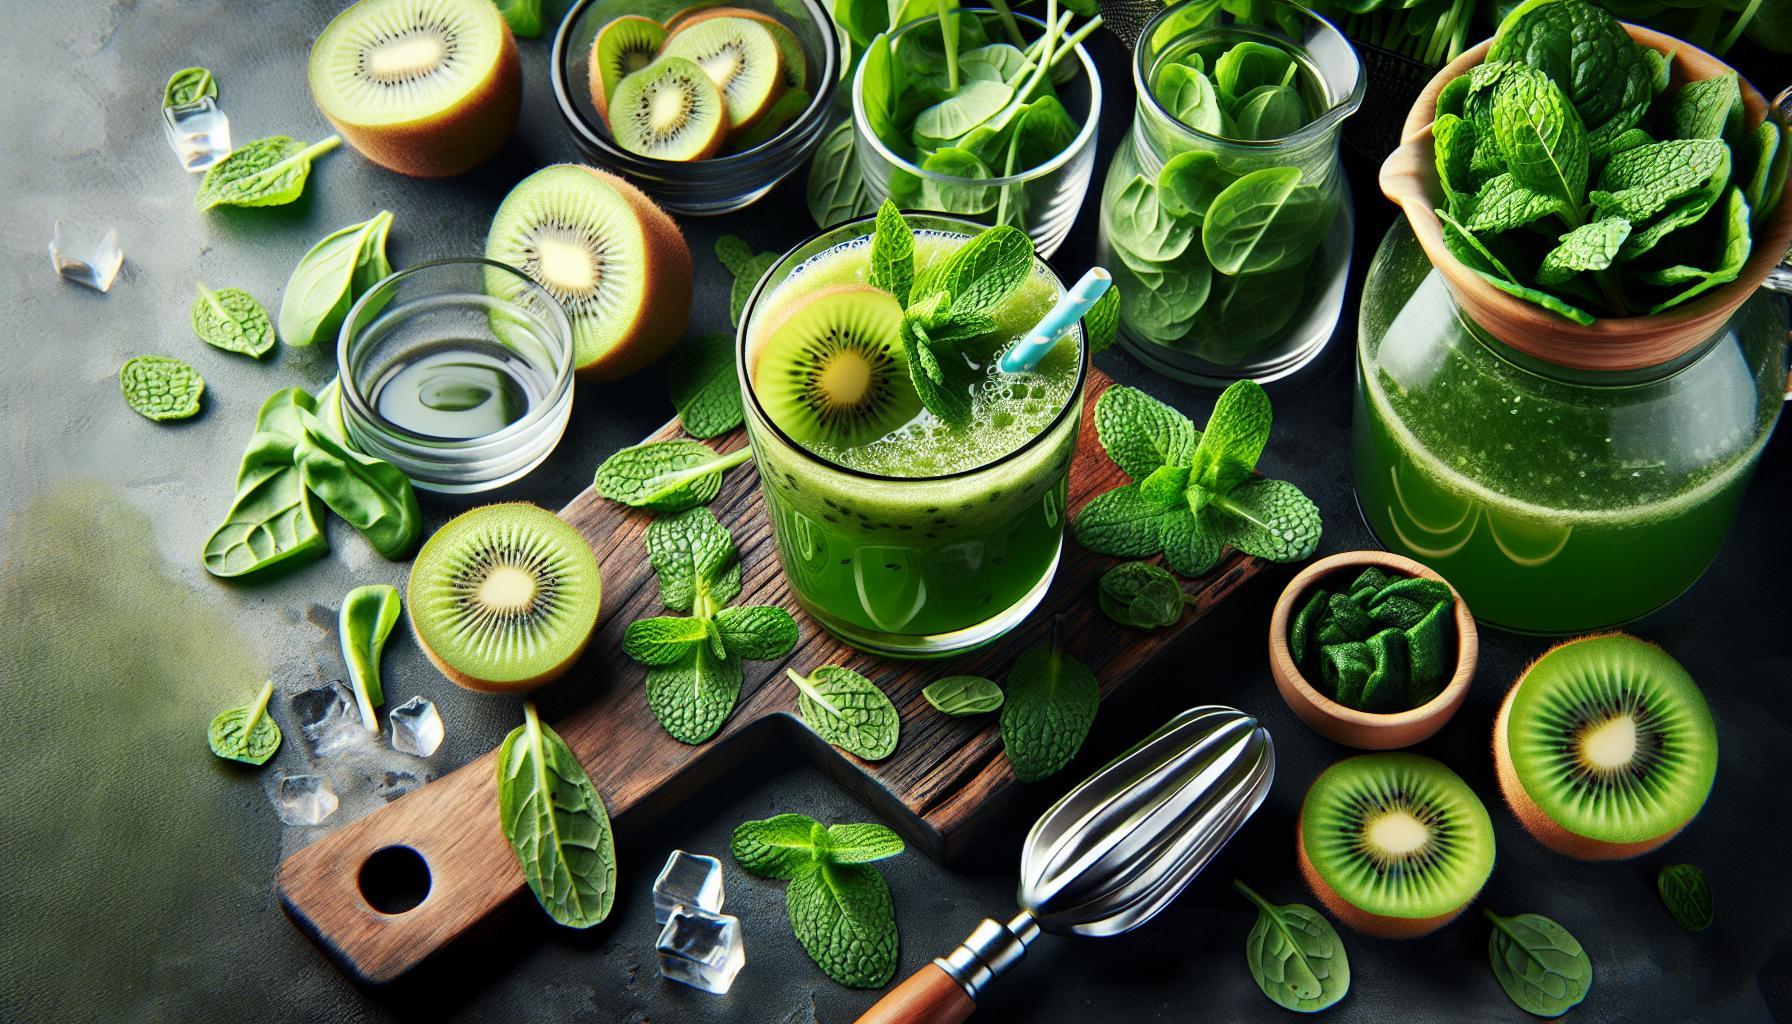 Refreshing Kiwi Mint and Spinach Juice Recipe for Vibrant Health & Energy